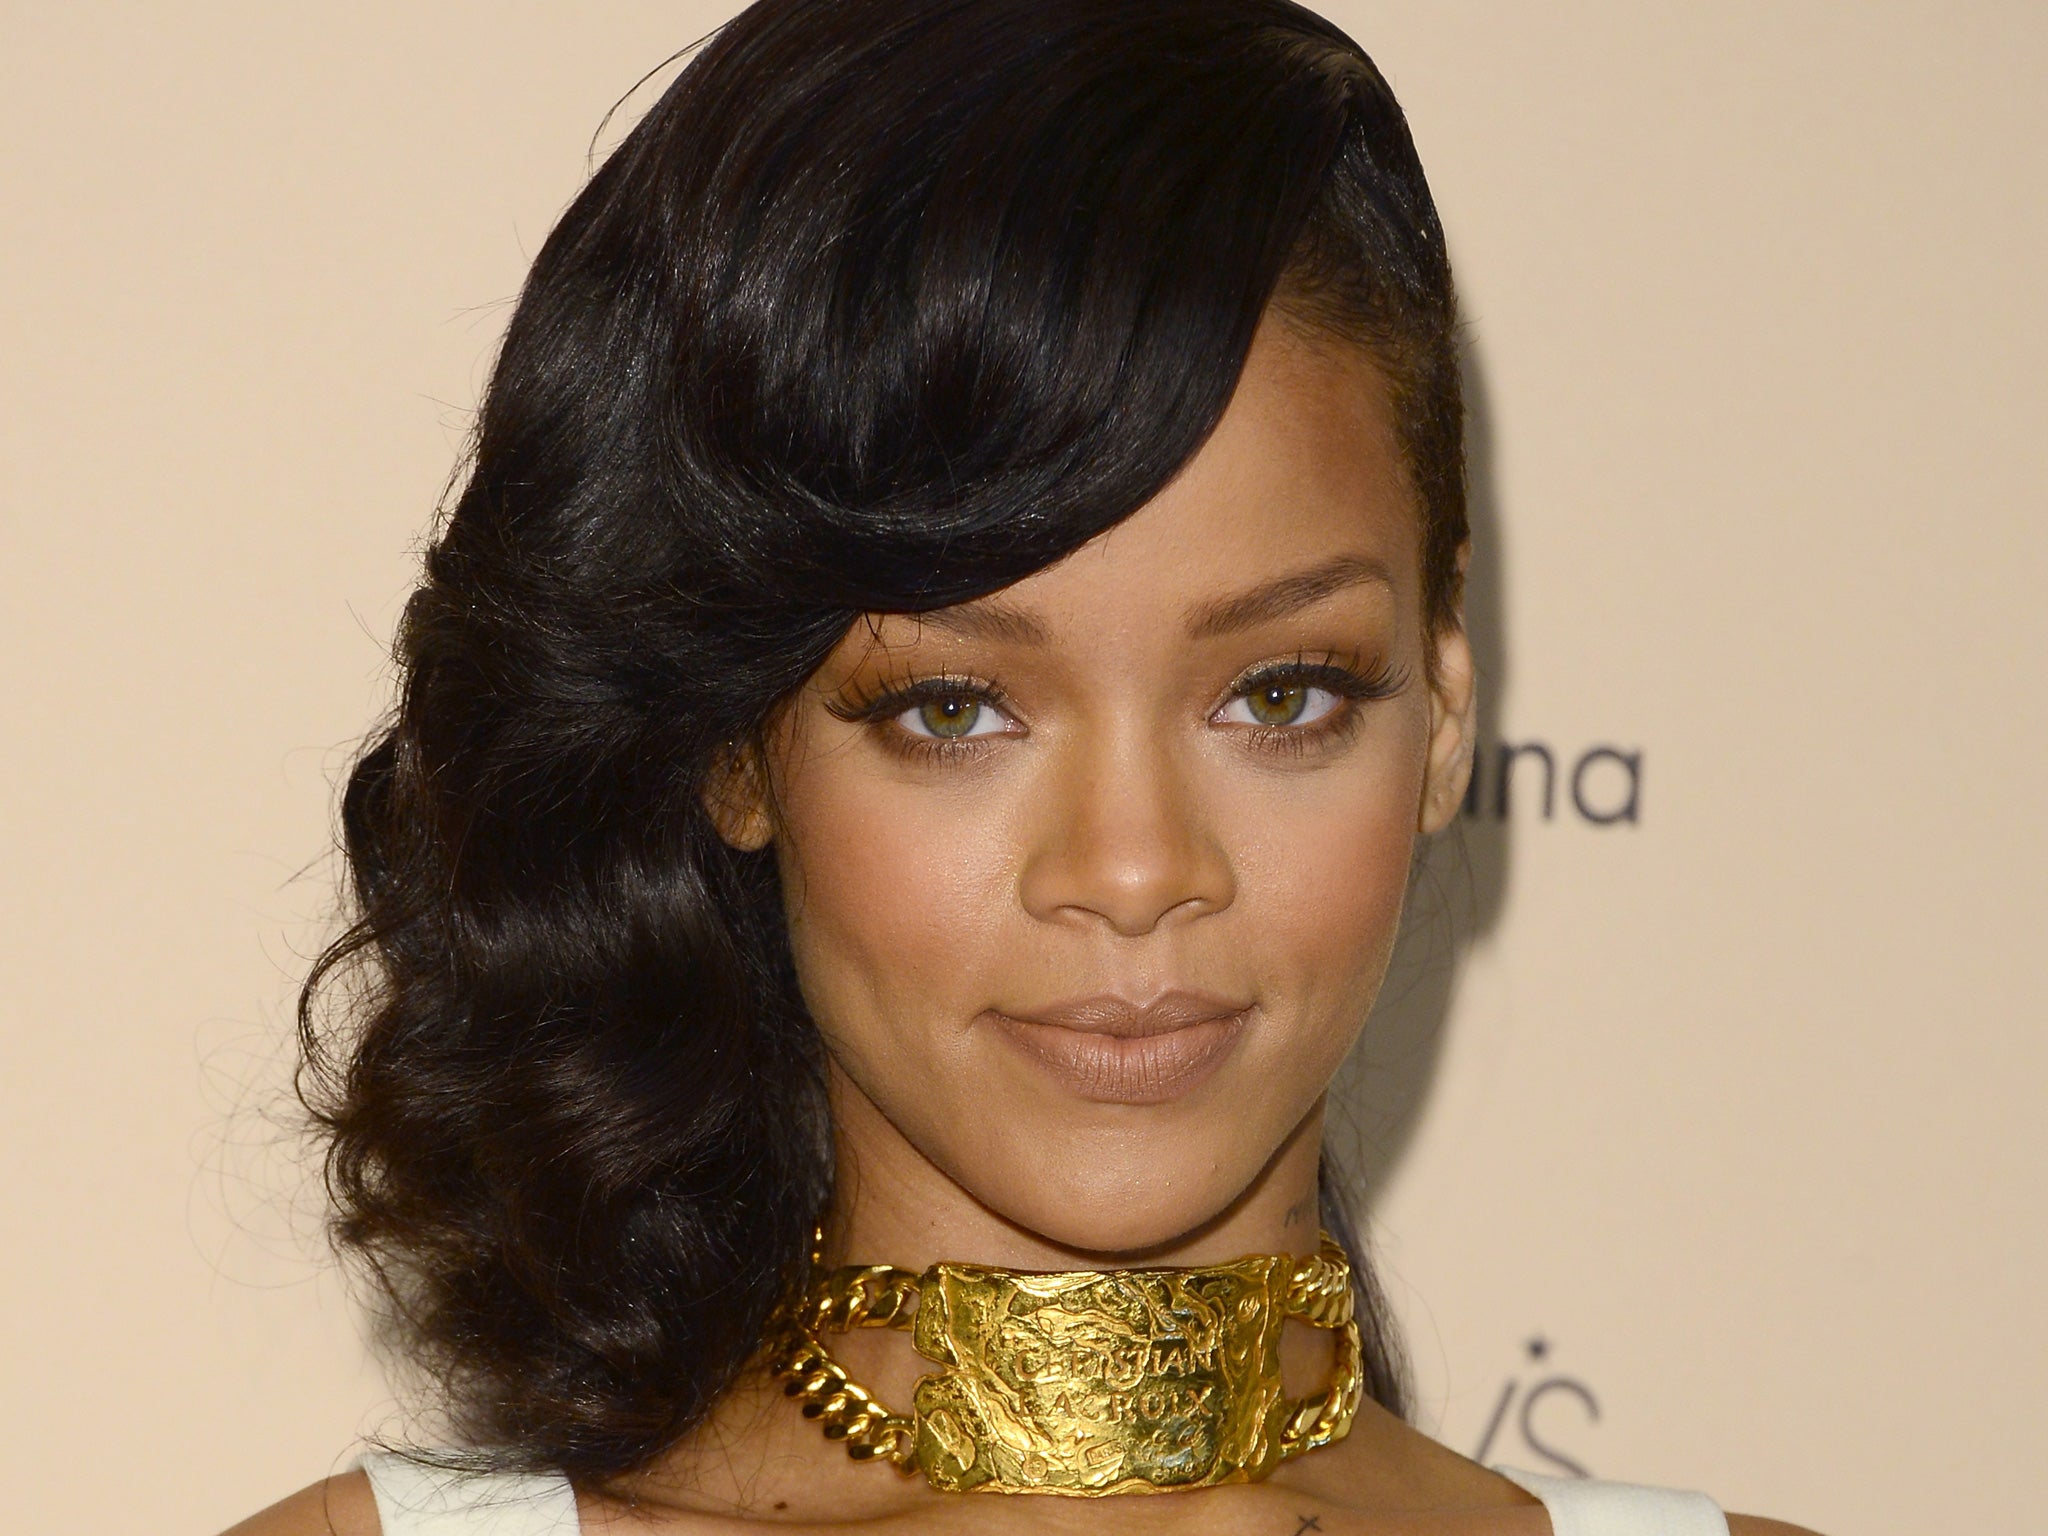 Singer Rihanna has collaborated with River Island to create a collection for the high street retailer